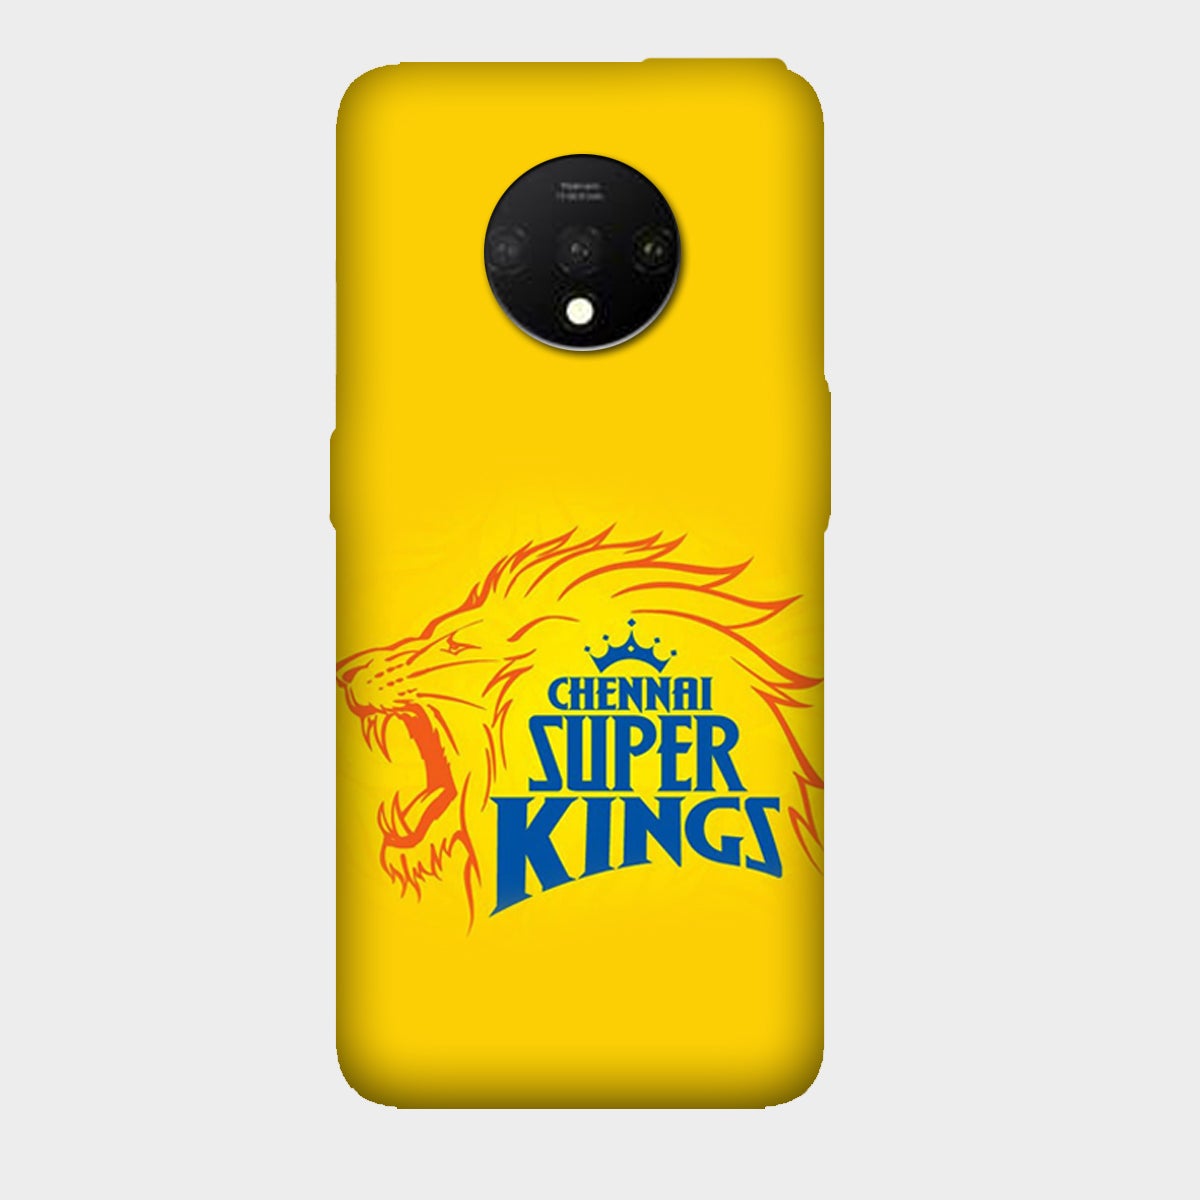 Chennai Super Kings - Yellow - Mobile Phone Cover - Hard Case - OnePlus